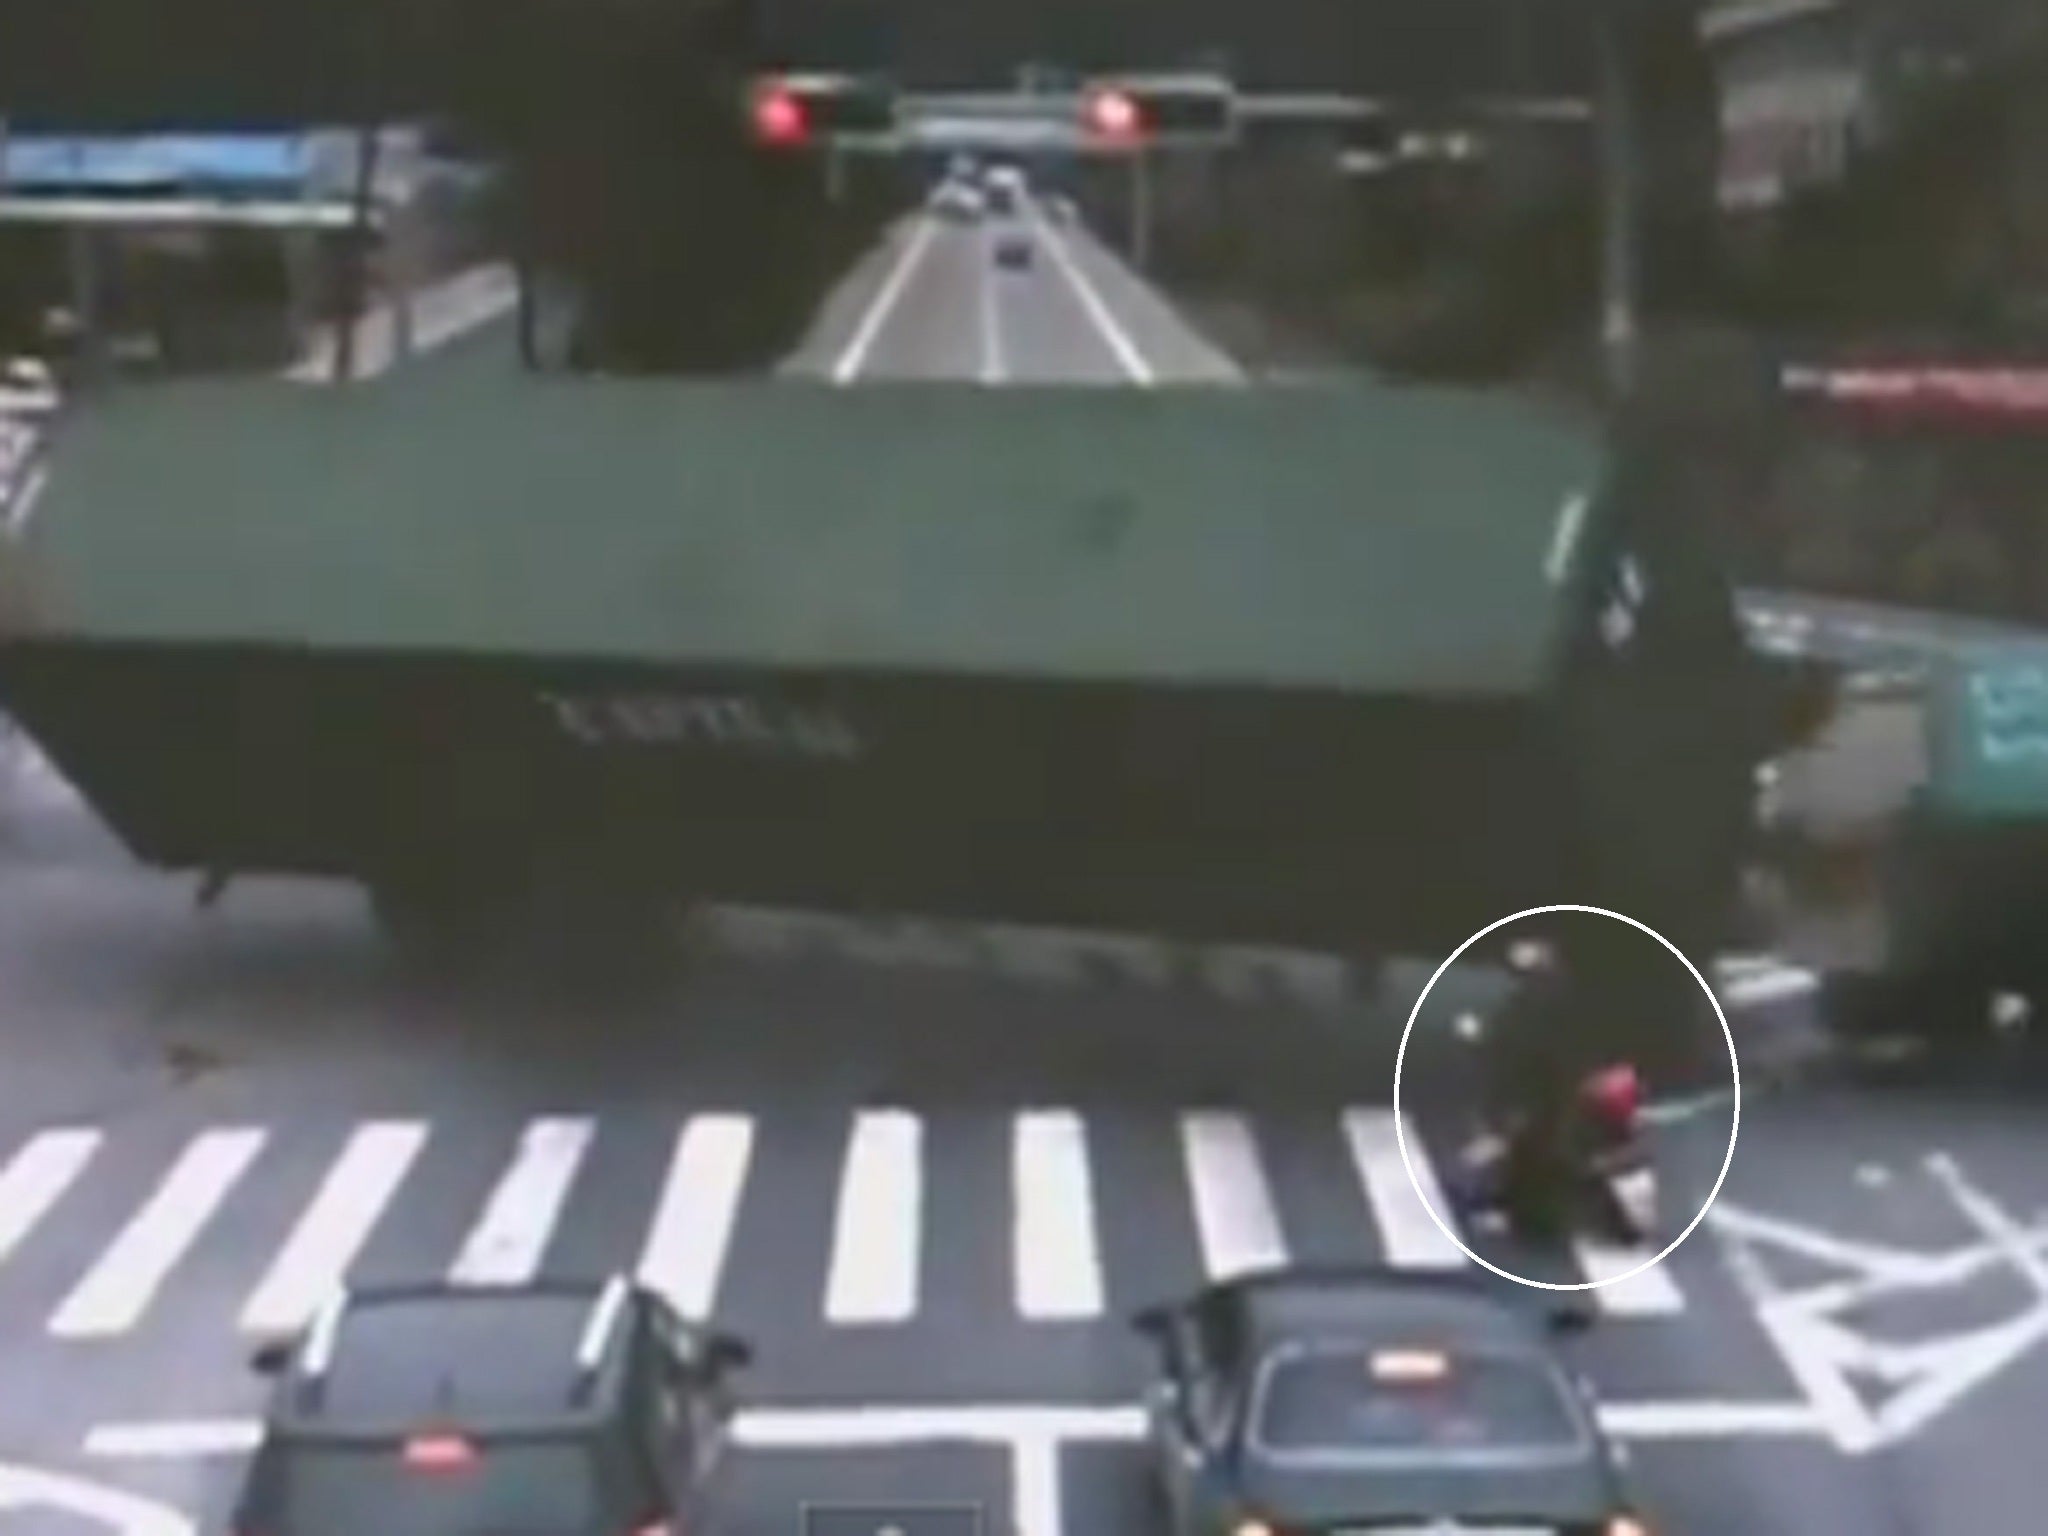 The moment the lorry tips over narrowly missing a motorcyclist